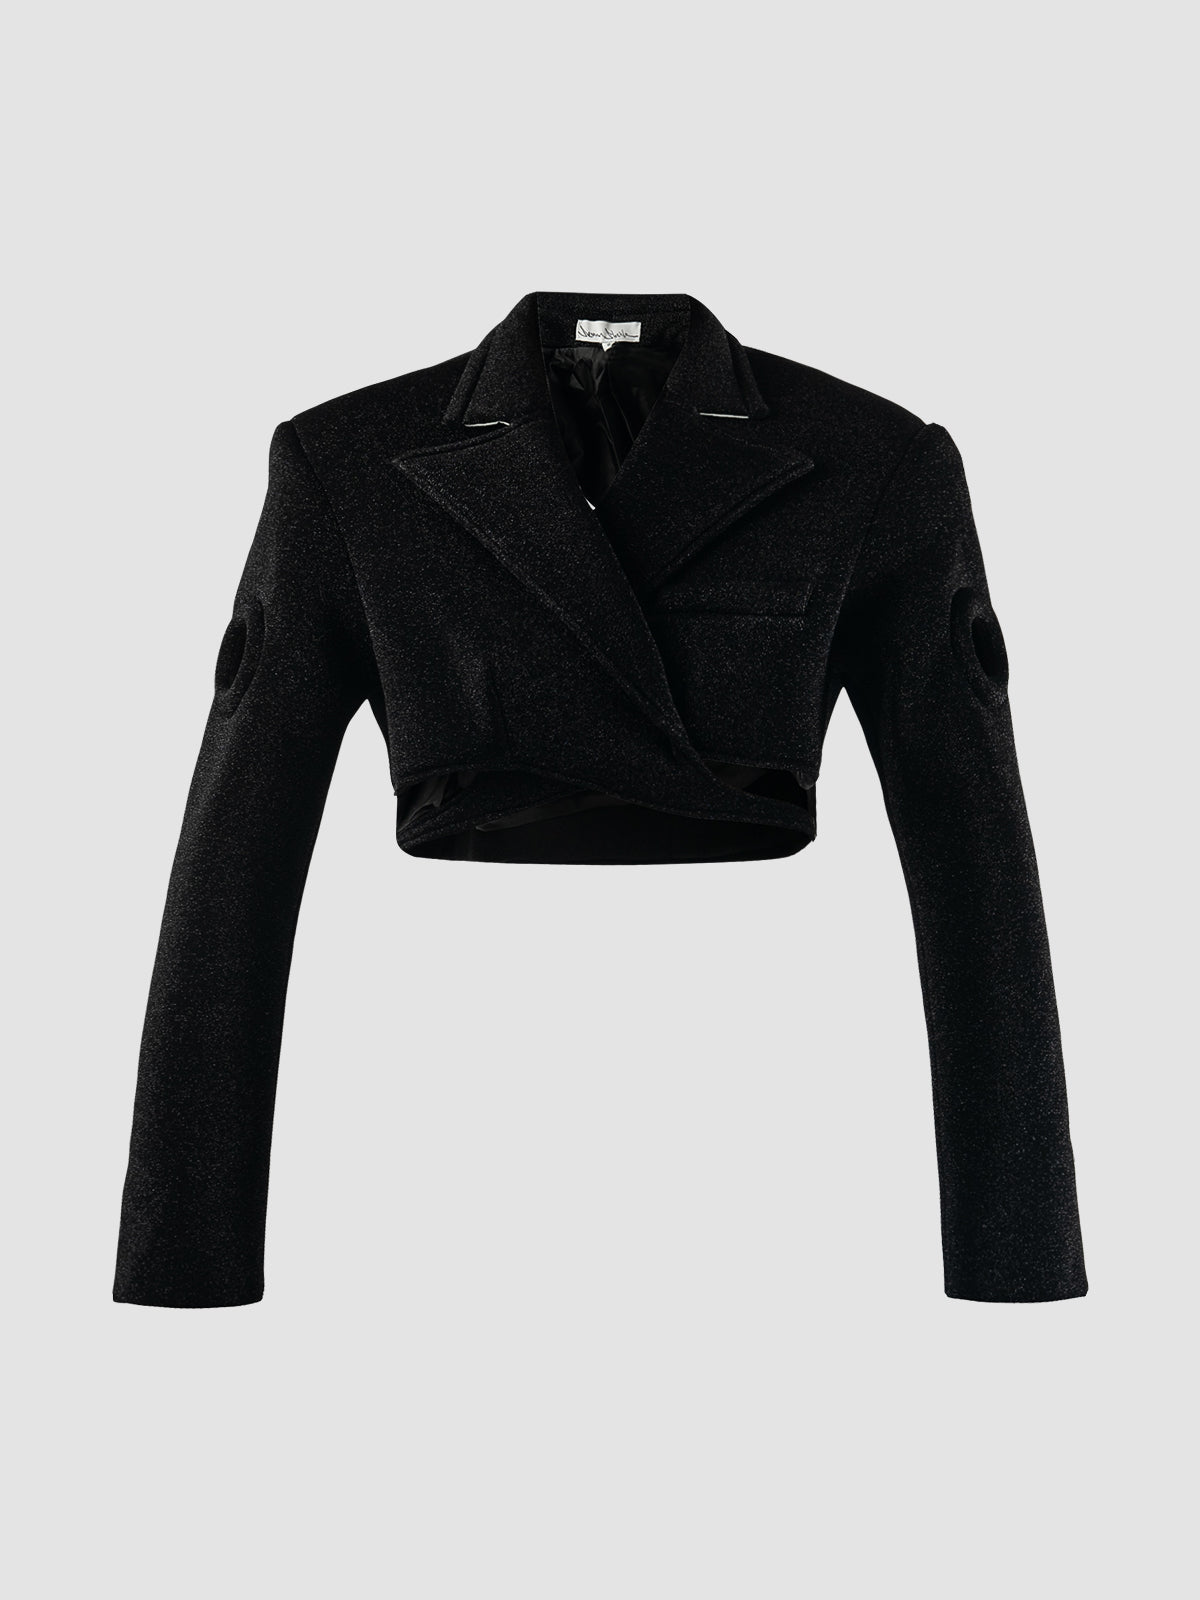 Black cropped tailored neoprene suit